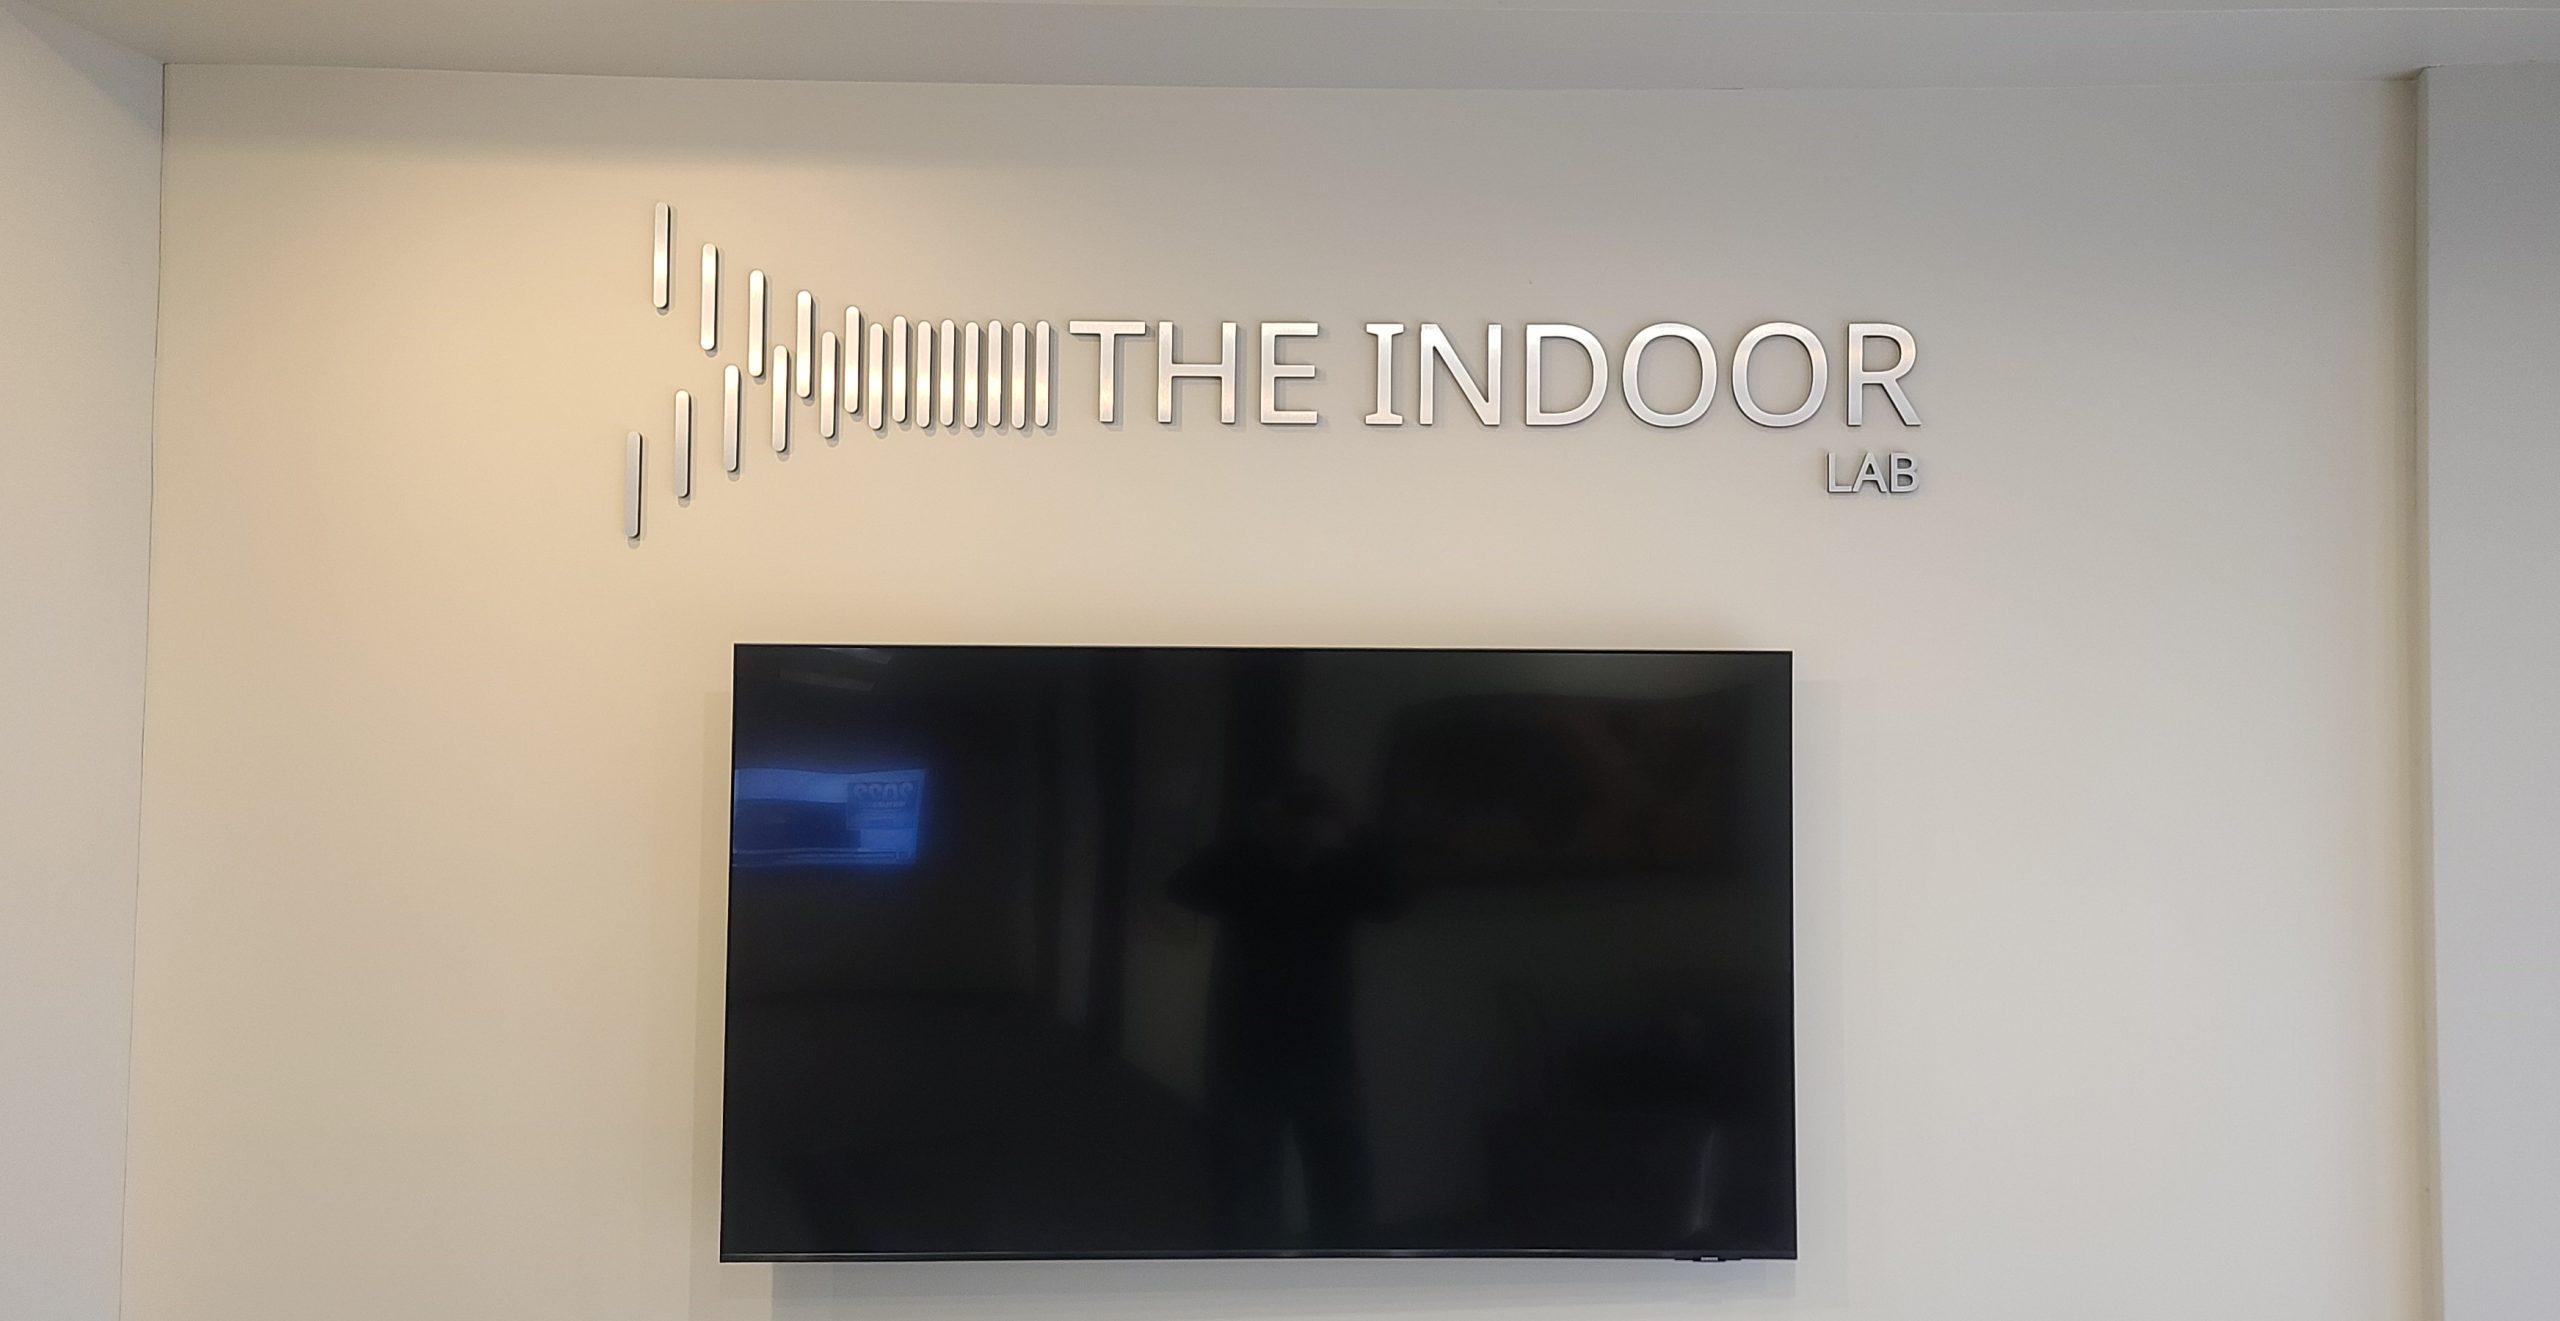 You are currently viewing Lobby Sign for The Indoor Lab in Irvine